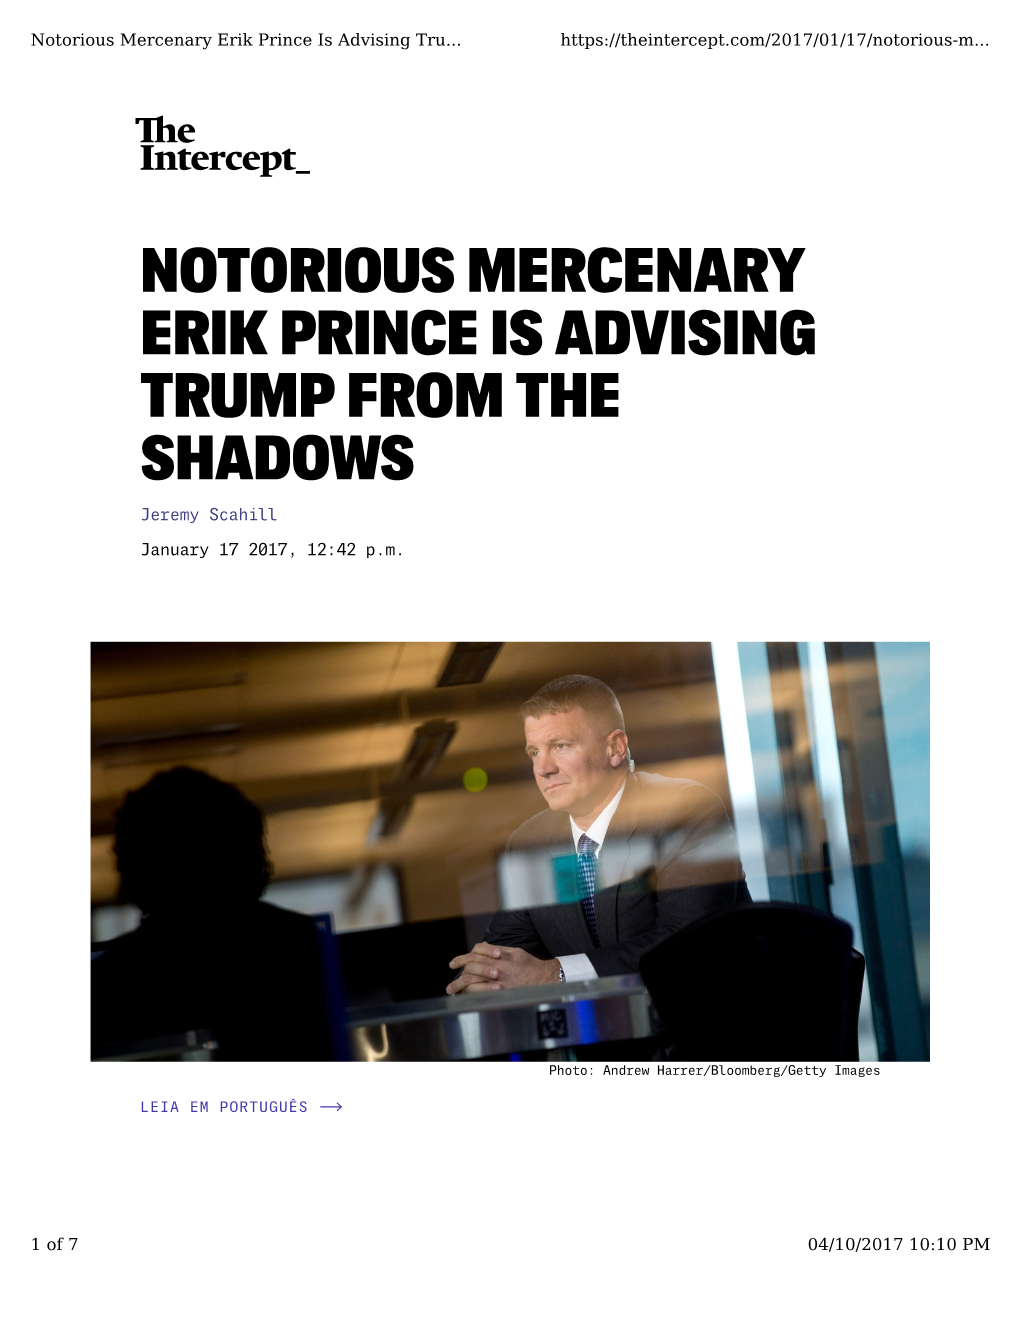 NOTORIOUS MERCENARY ERIK PRINCE IS ADVISING TRUMP from the SHADOWS Jeremy Scahill January 17 2017, 12:42 P.M